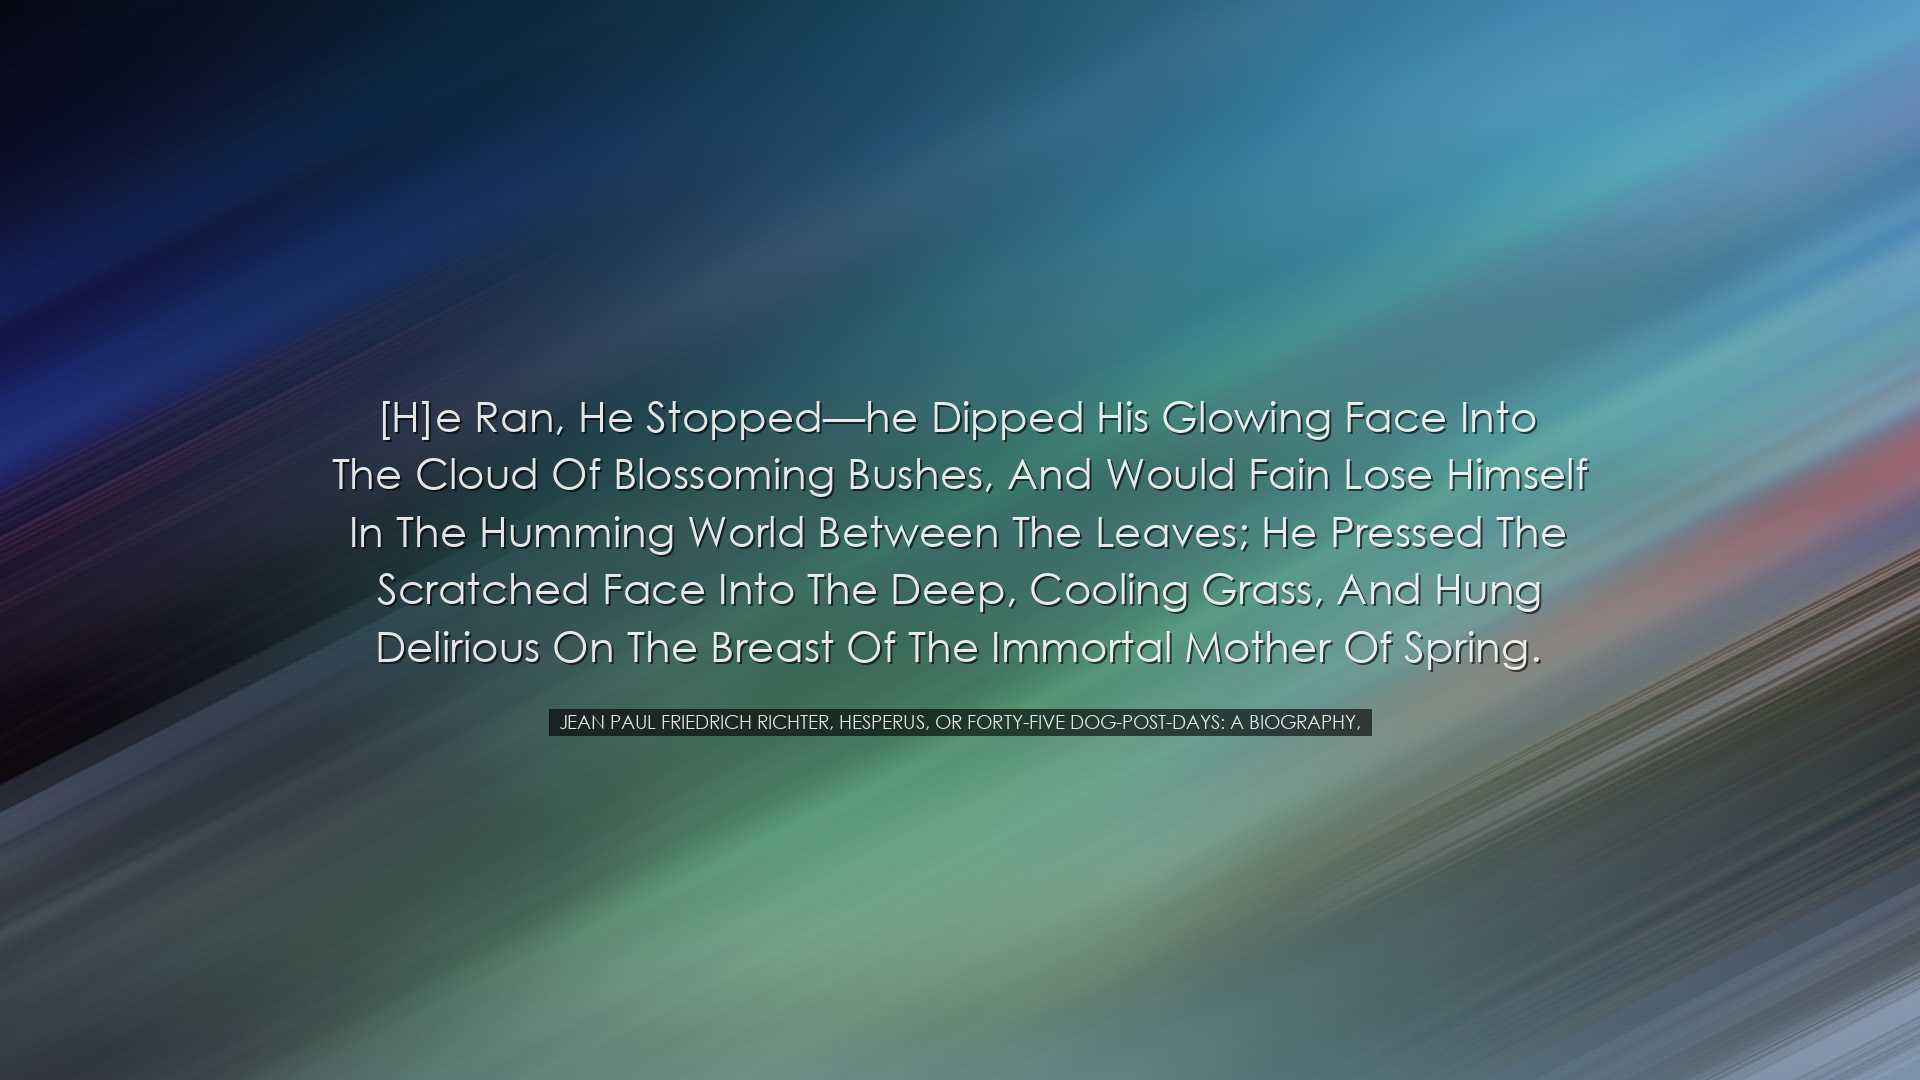 [H]e ran, he stopped—he dipped his glowing face into the clo